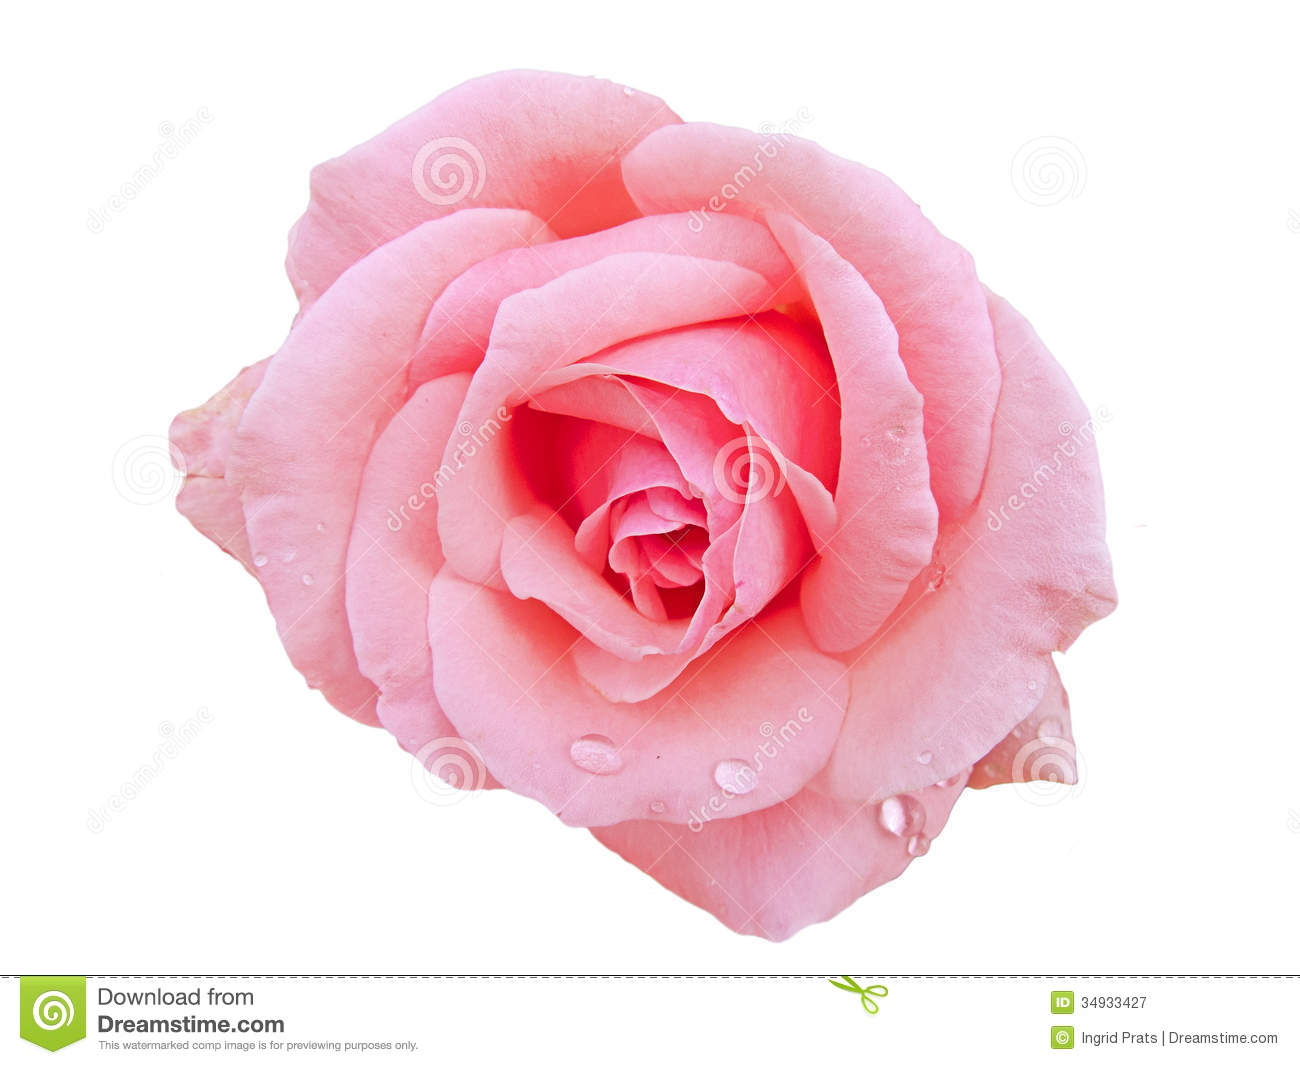 Image About Rose Reference